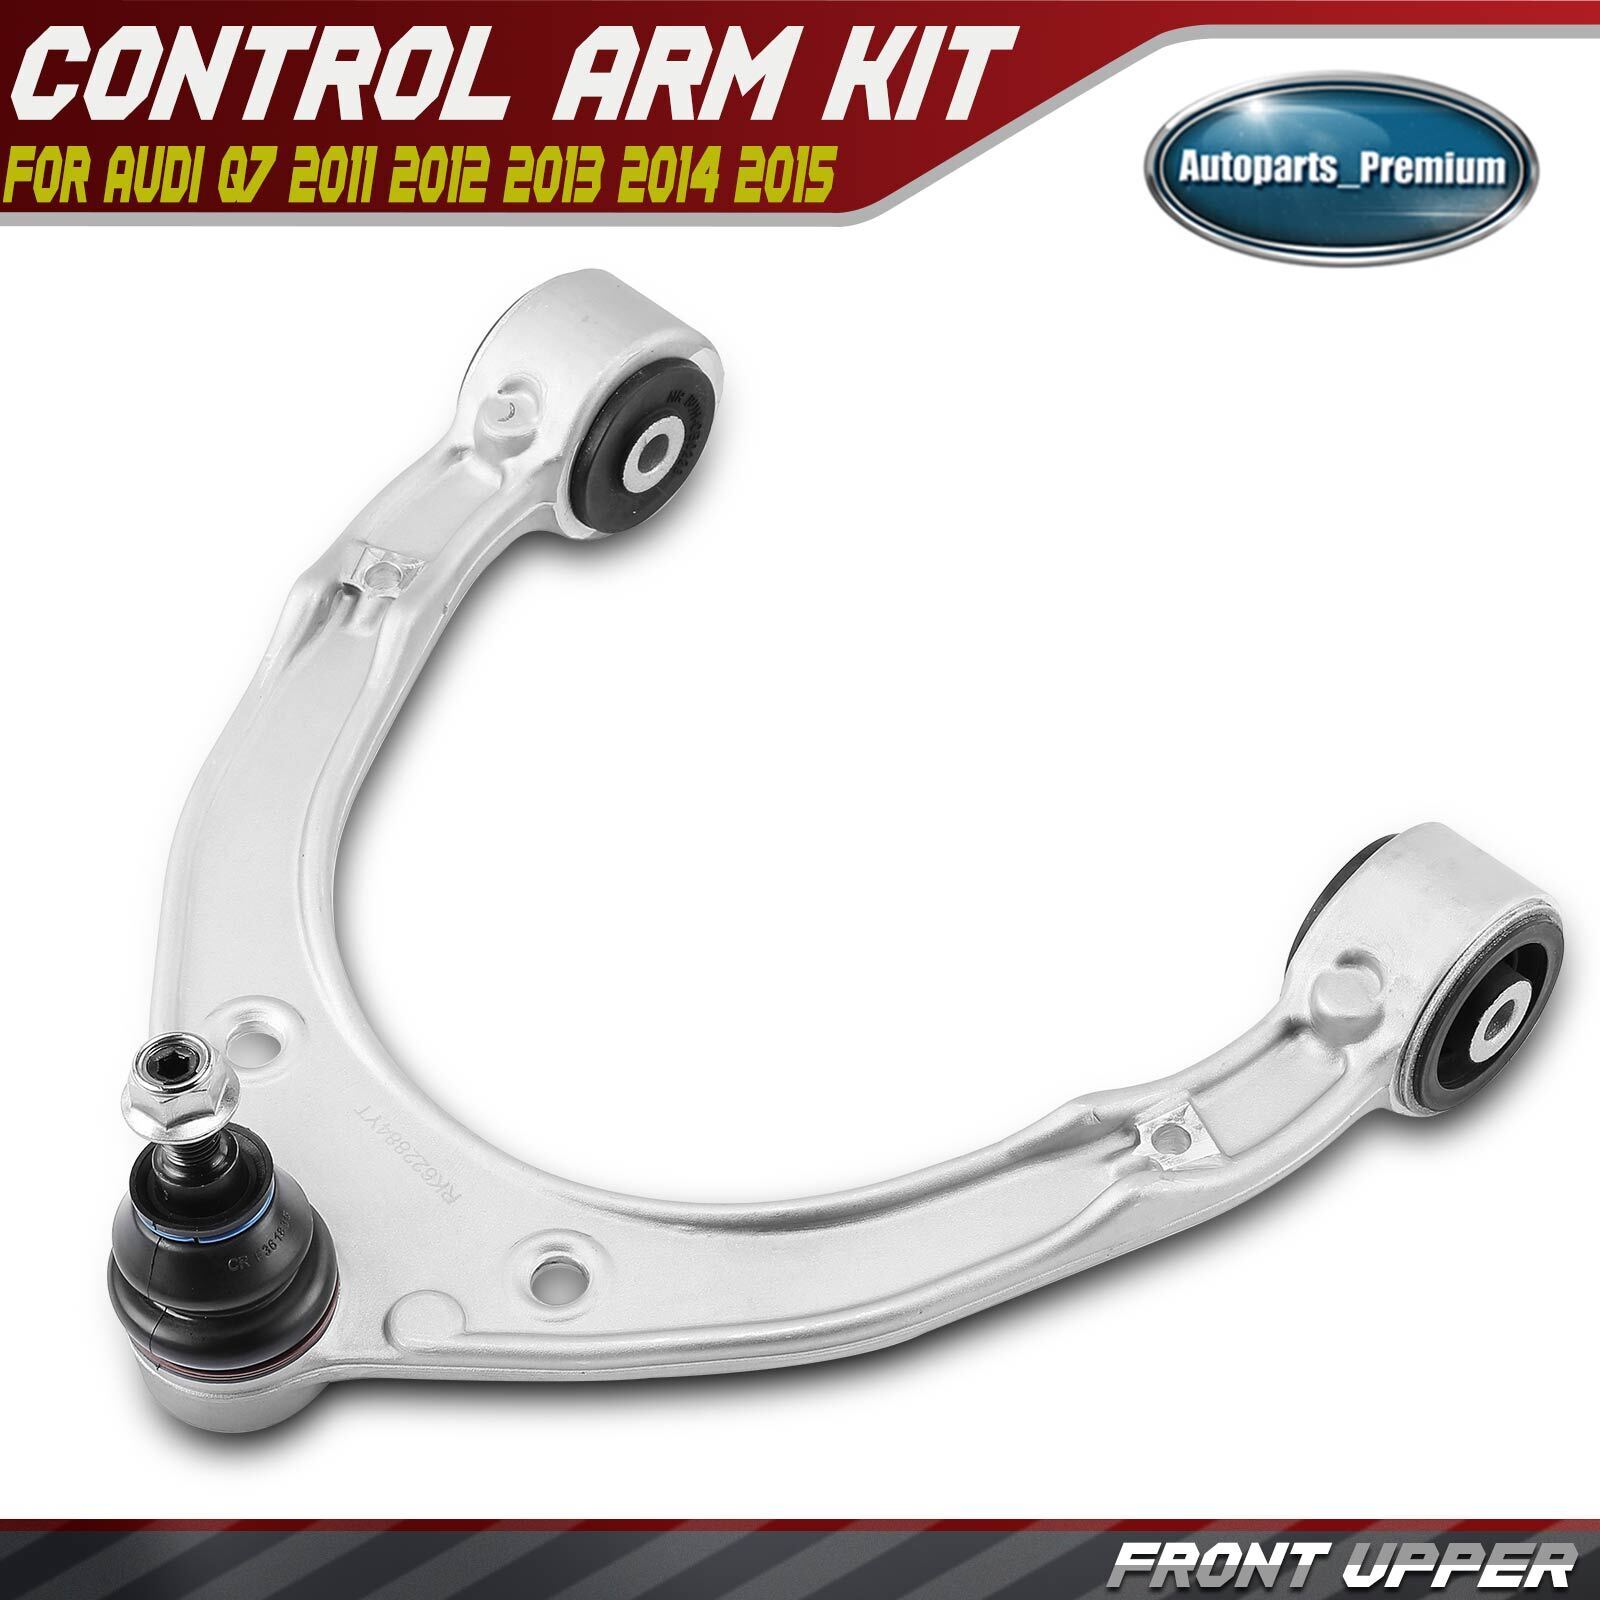 New Front Upper Control Arm w/ Ball Joint for Audi Q7 2011 2012 2013 2014 2015